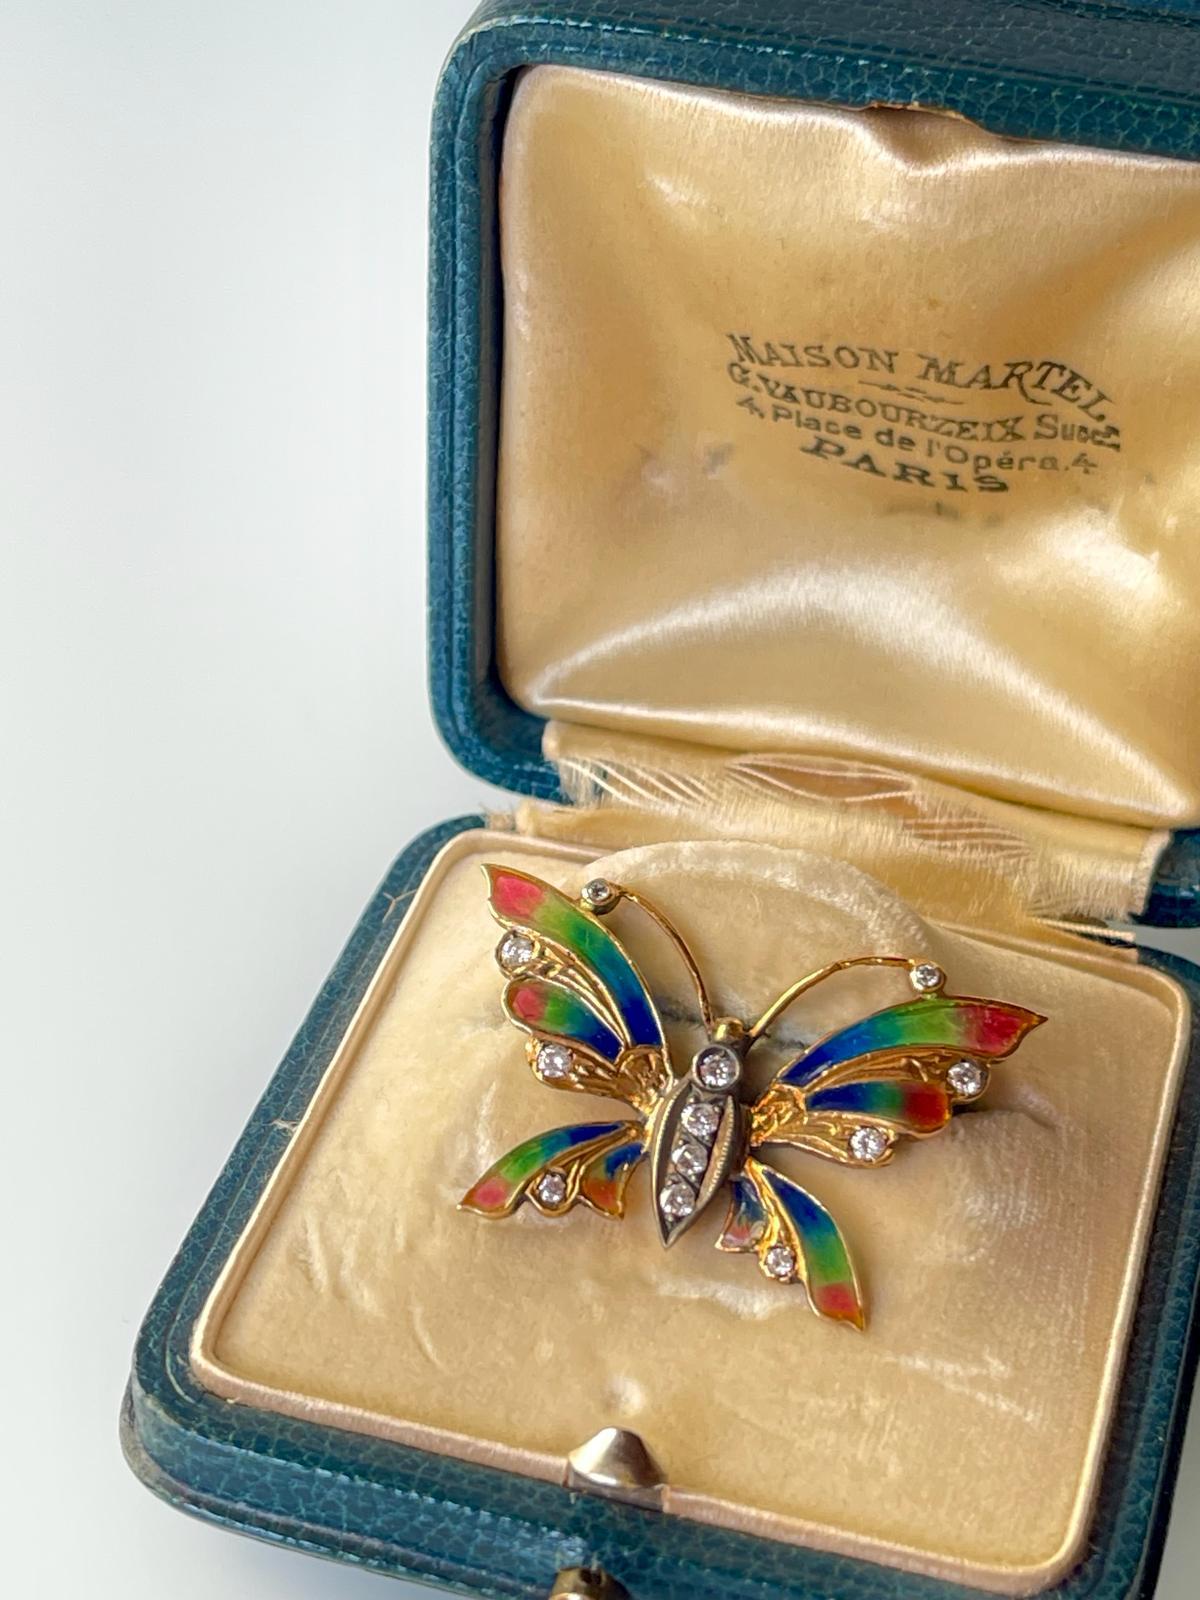 A pretty early 20th C Art Nouveau Edwardian butterfly brooch in 18K yellow gold and silver with rare to find  plique a jour multicolour enamel. 

The brooch is embellished with 12 brilliant cut diamonds at approx. 0.40 ct TW, measures 2.2 x 3.6 cm